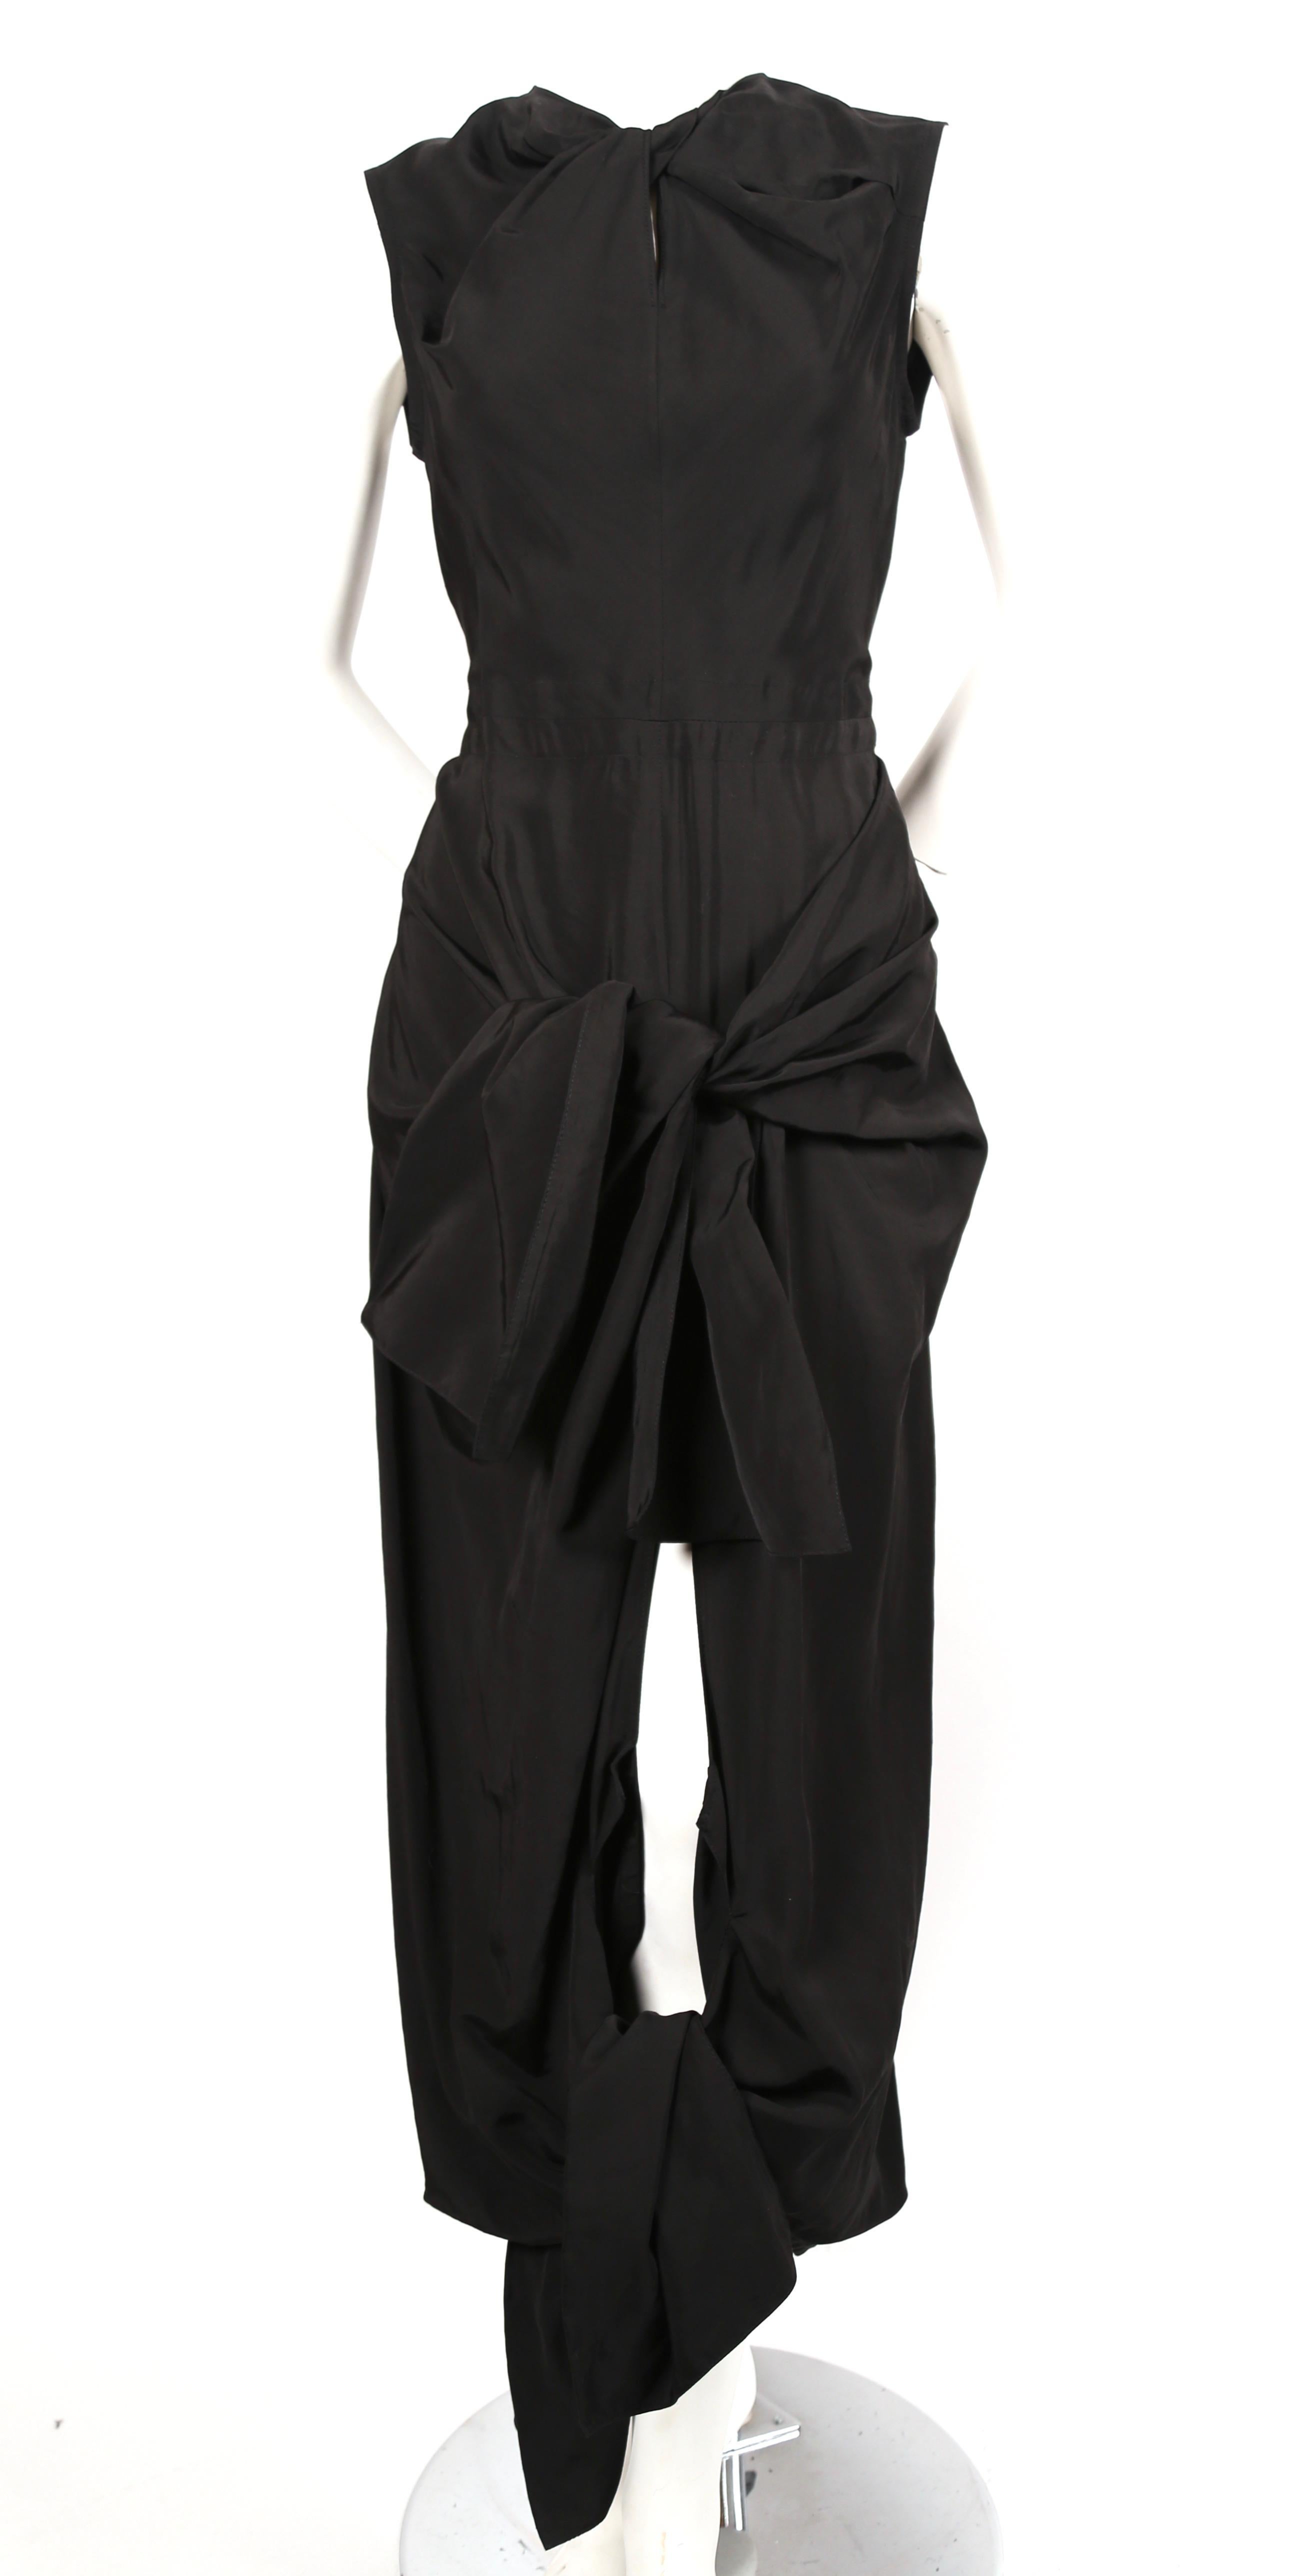 Celine By Phoebe Philo black dress with ties and cut out back at ...